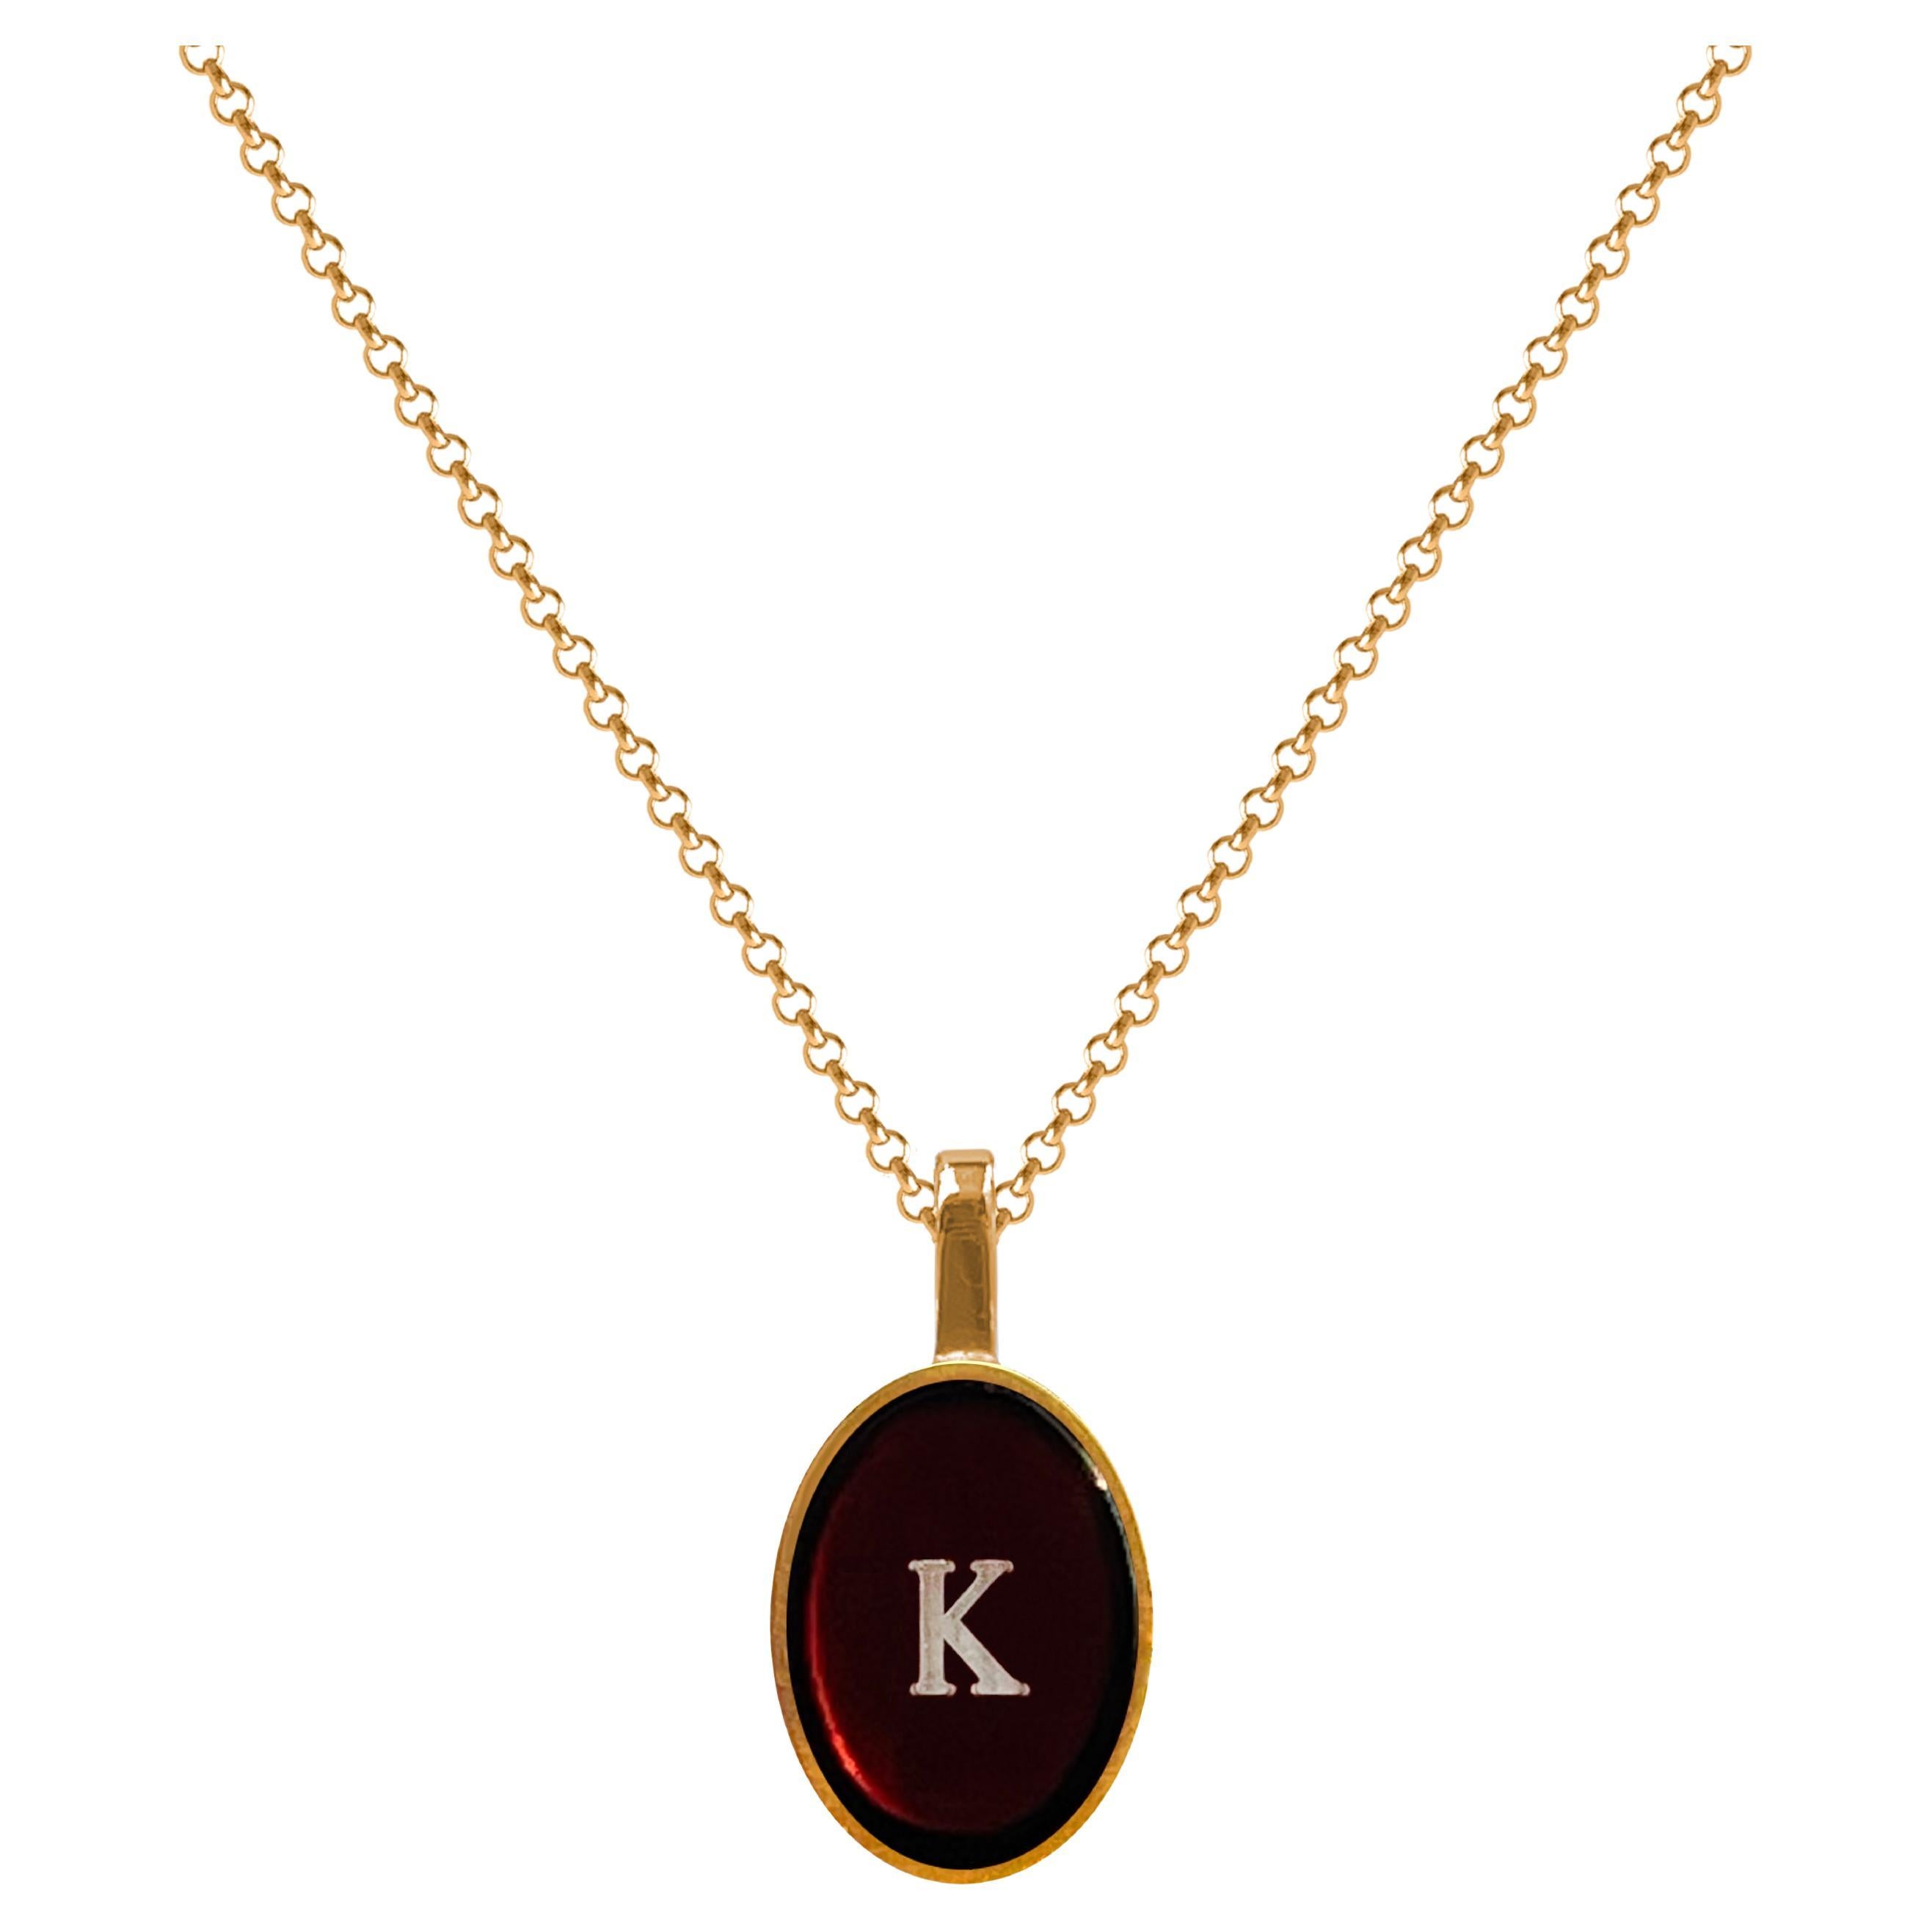  Necklace with amber pendant and name letter gold - K For Sale